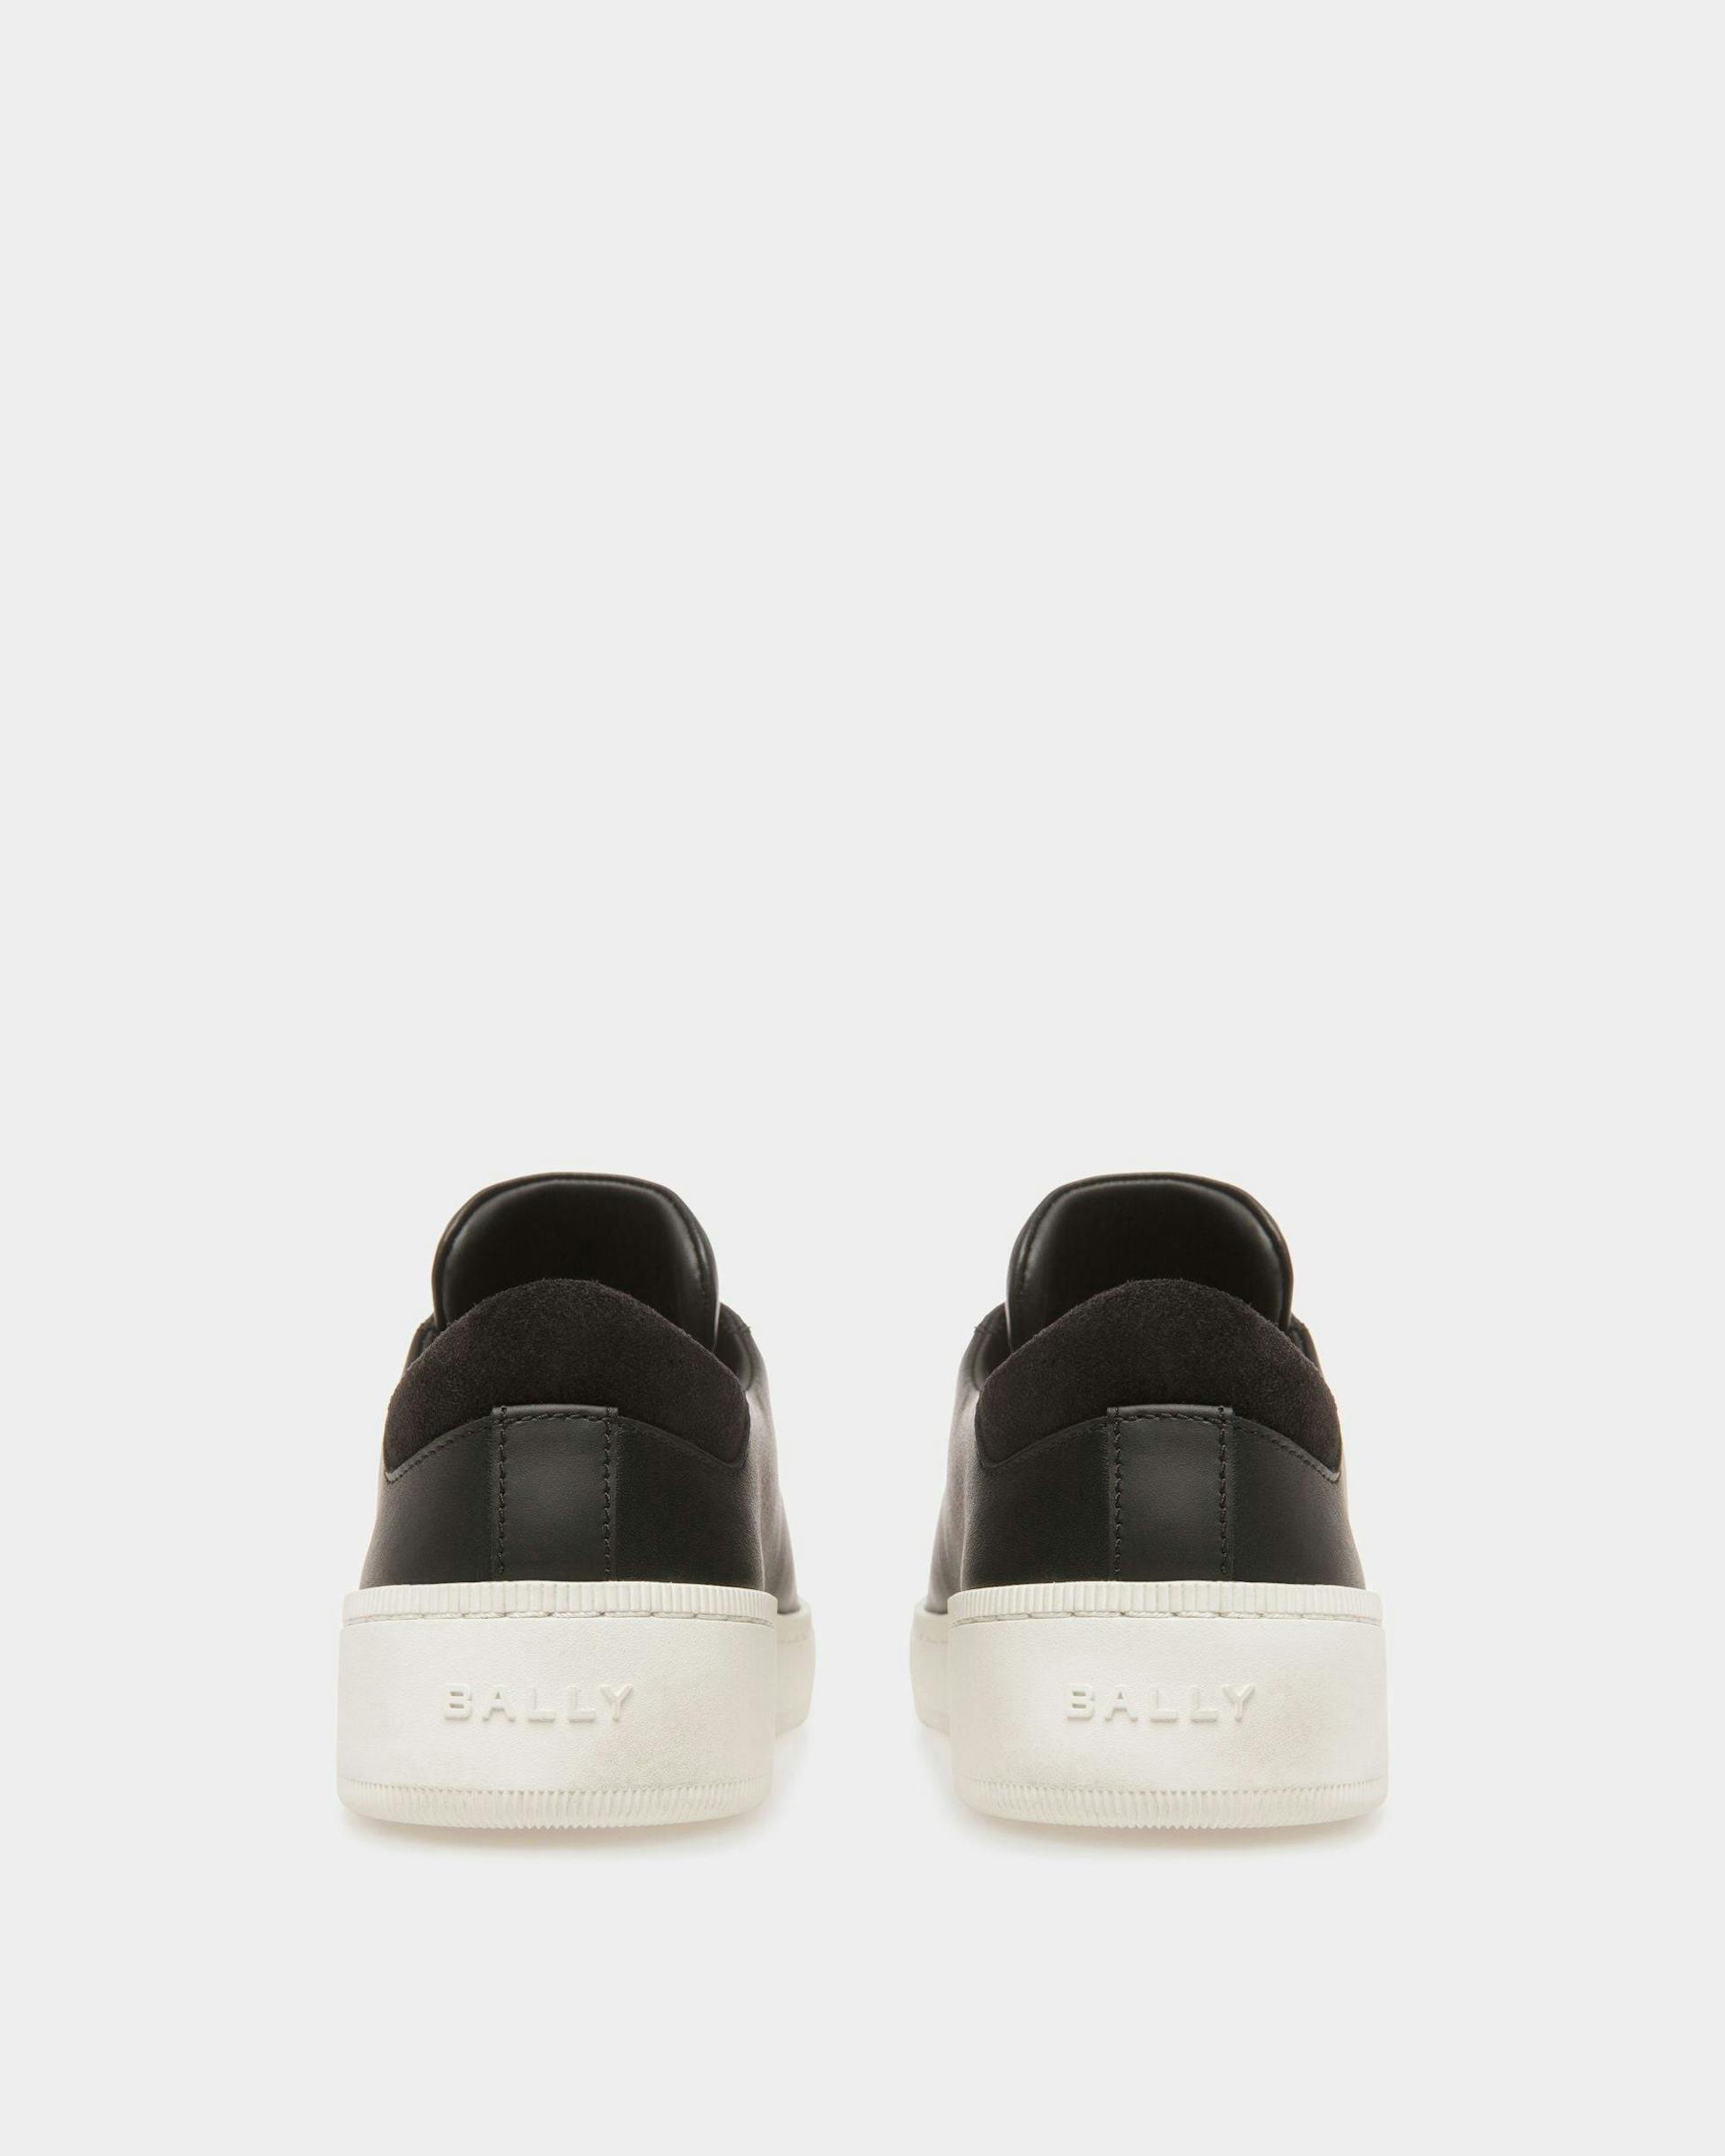 Raise Sneakers In Black And White Leather - Women's - Bally - 05